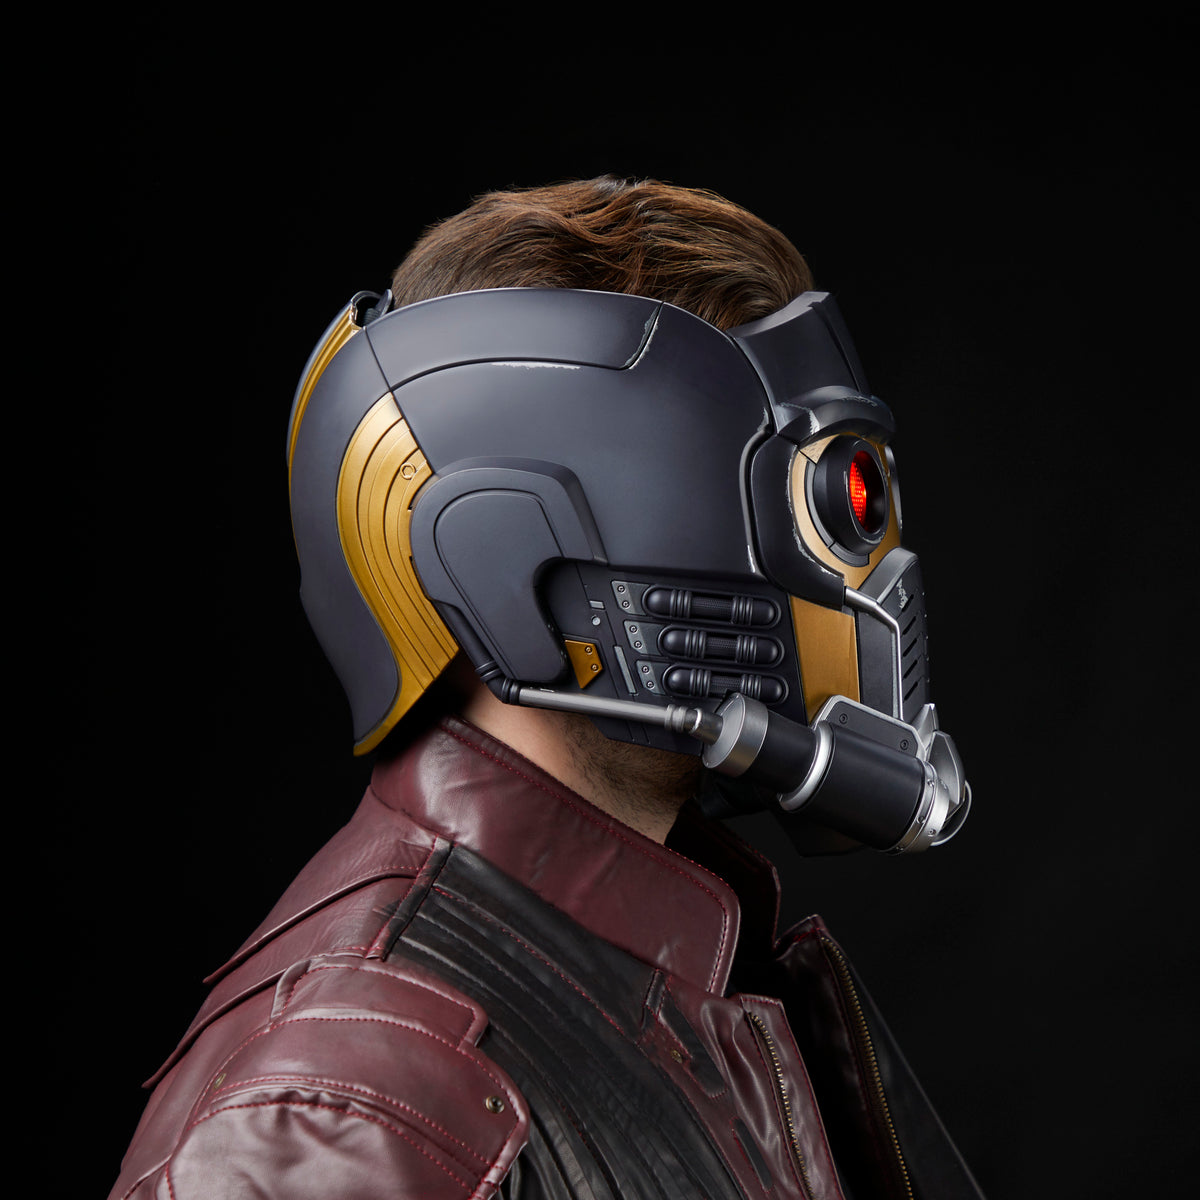 frekvens relæ Rendition Marvel Legends Series Star-Lord Electronic Role Play Helmet – Hasbro Pulse